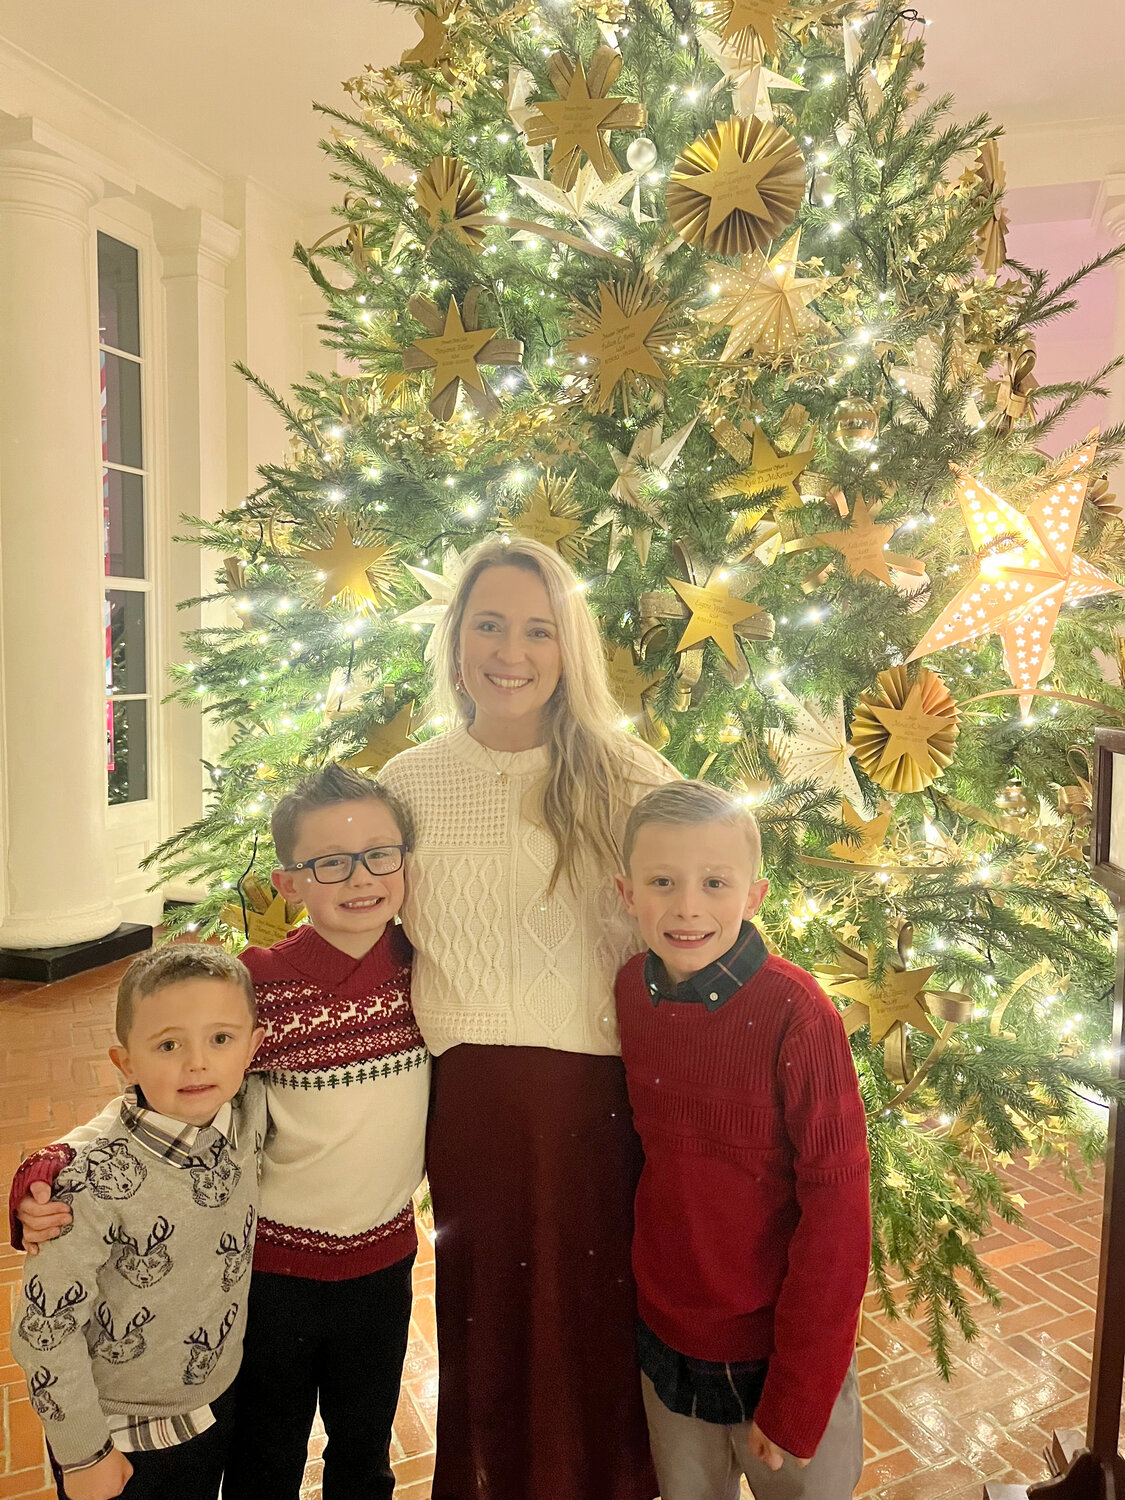 Skylar Martin, second from right, was one of hundreds of applicants chosen to decorate the White House in Washington D.C. Martin and her husband, Kyle Martin are both Pleasant Hill natives. Martin is standing with her three sons, Cohen, 5, Aiden,  7, and Liam, 9, at the Gold Star tree, which is dedicated to the families of soldiers killed in action, during an event Sunday.